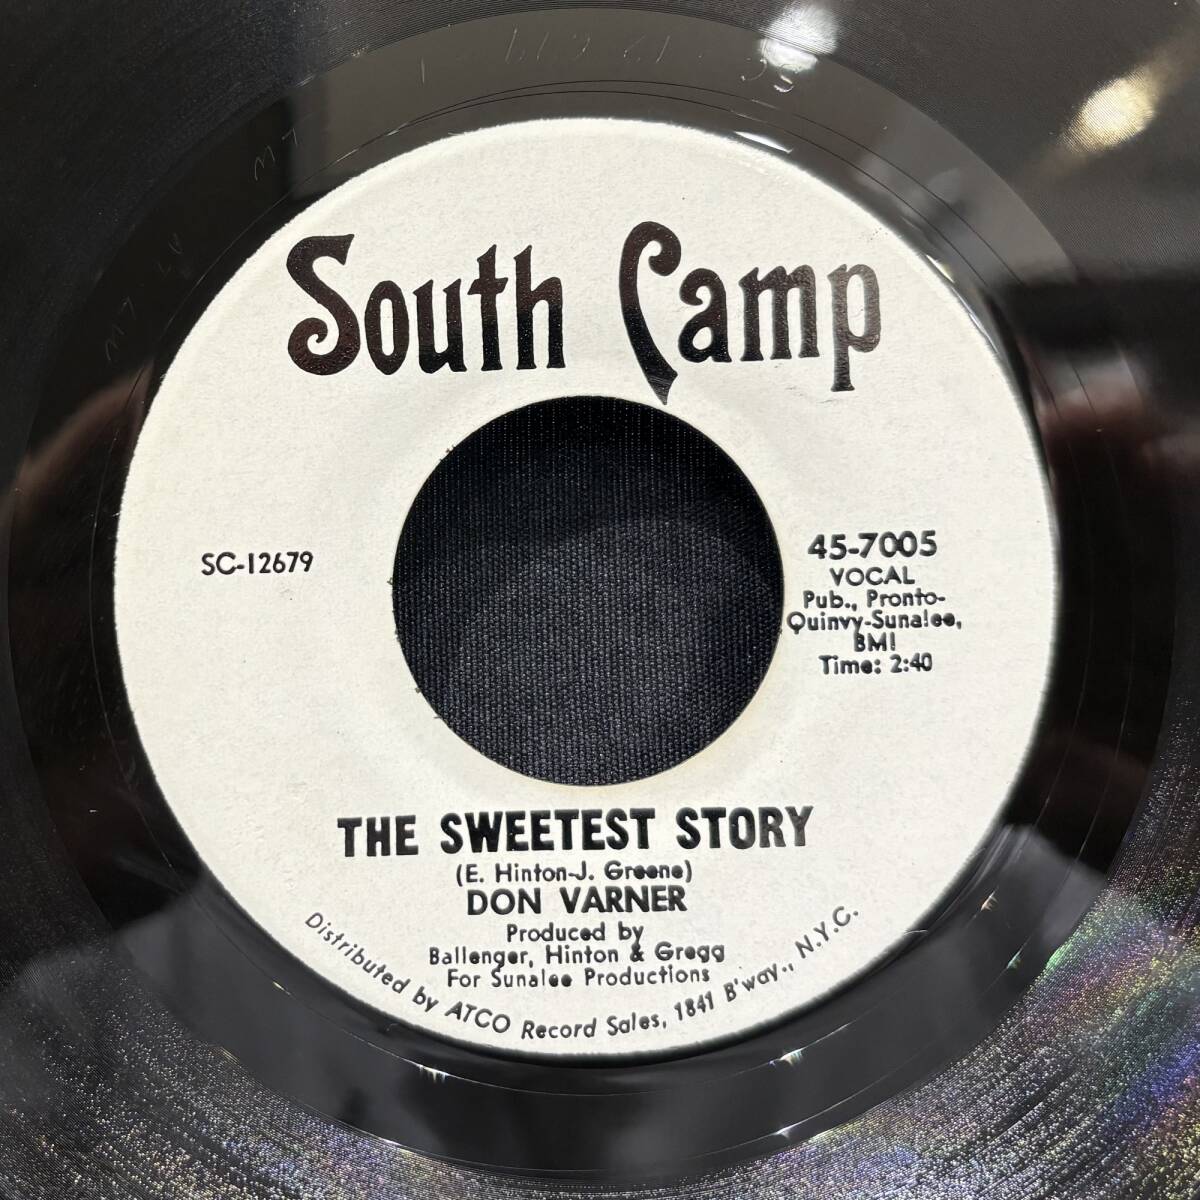 [EP]Don Varner - Home For The Summer / The Sweetest Story US запись Promo South Camp 45-7005